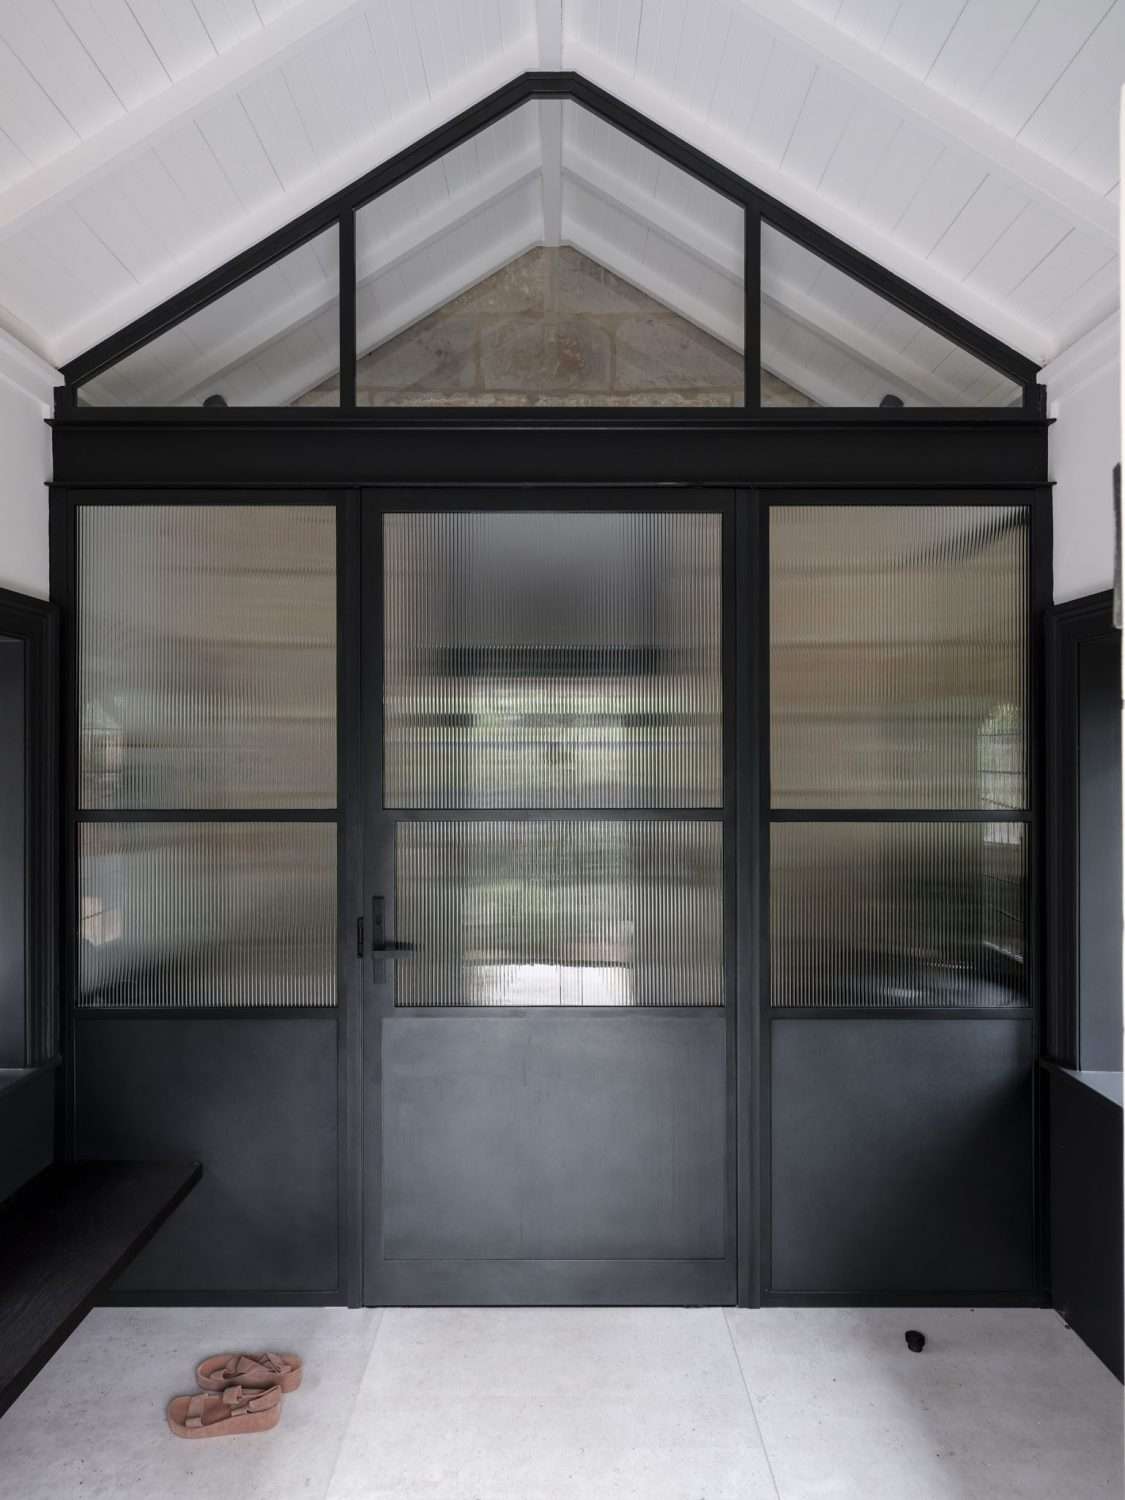 Maranatha House by BIJL Architecture showing house entry with large black steel doors with fluted glass